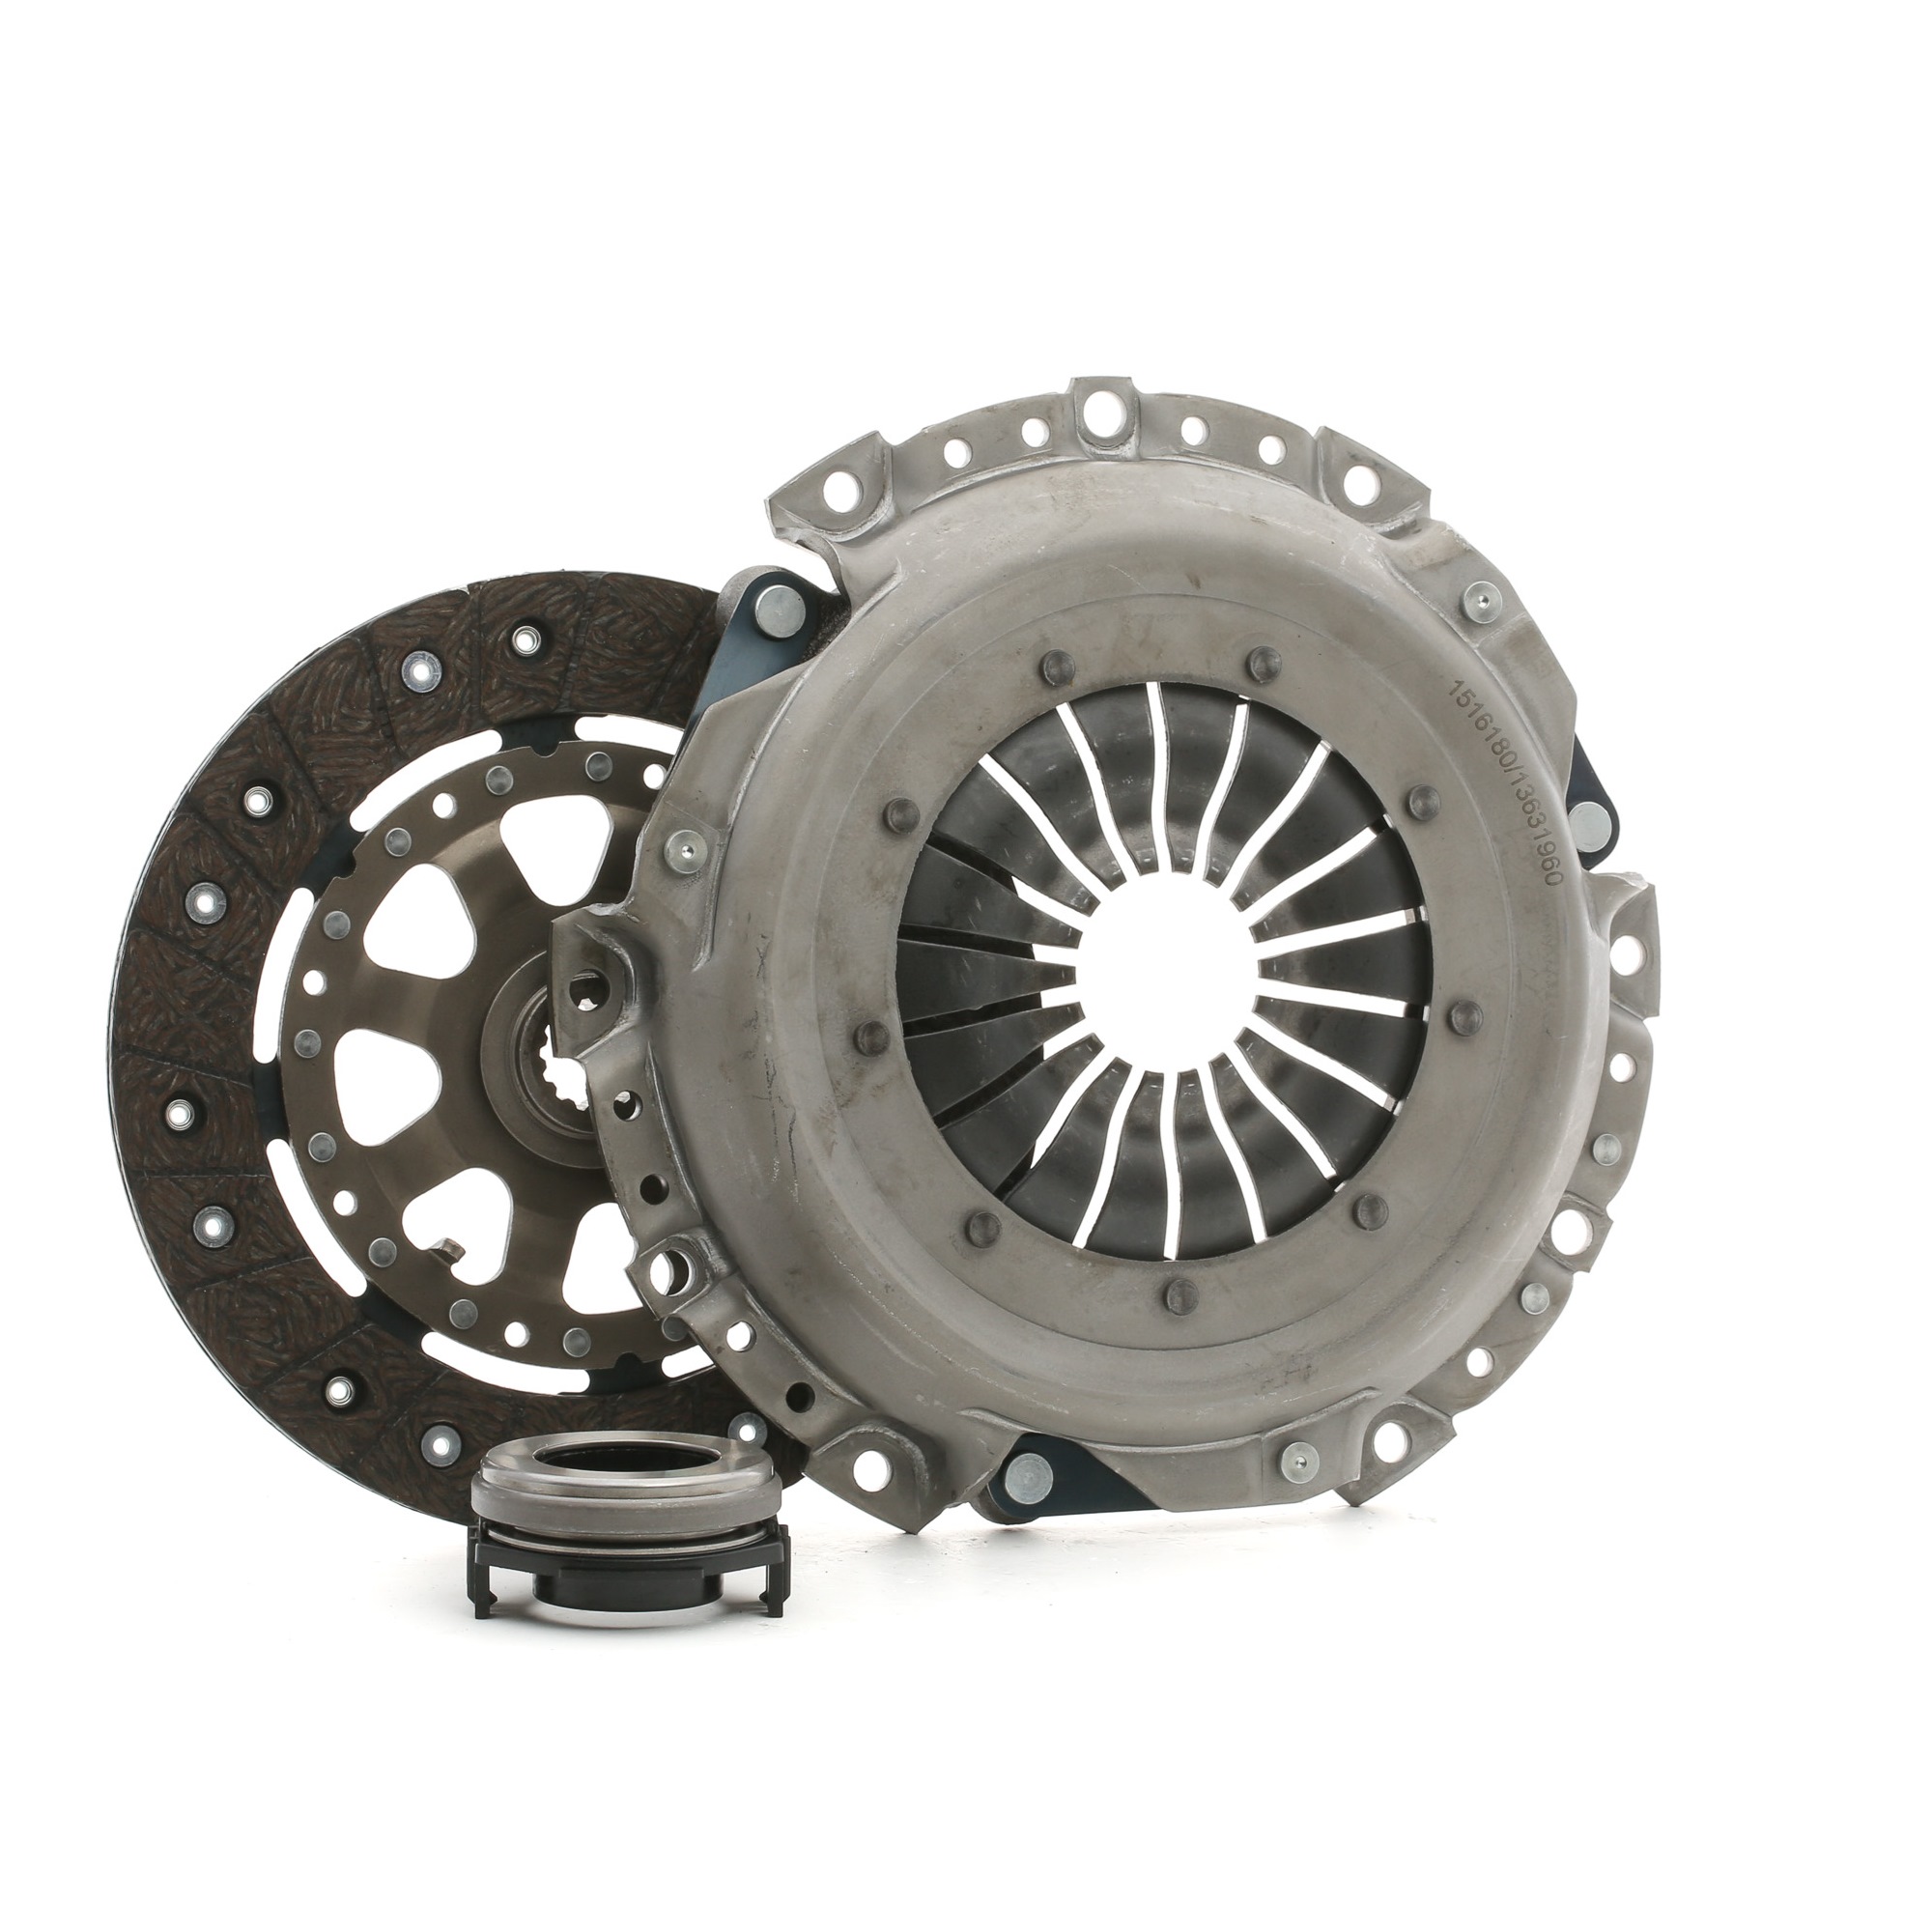 RIDEX 479C0166 Clutch kit for engines with dual-mass flywheel, three-piece, with clutch pressure plate, with clutch disc, with clutch release bearing, 220mm